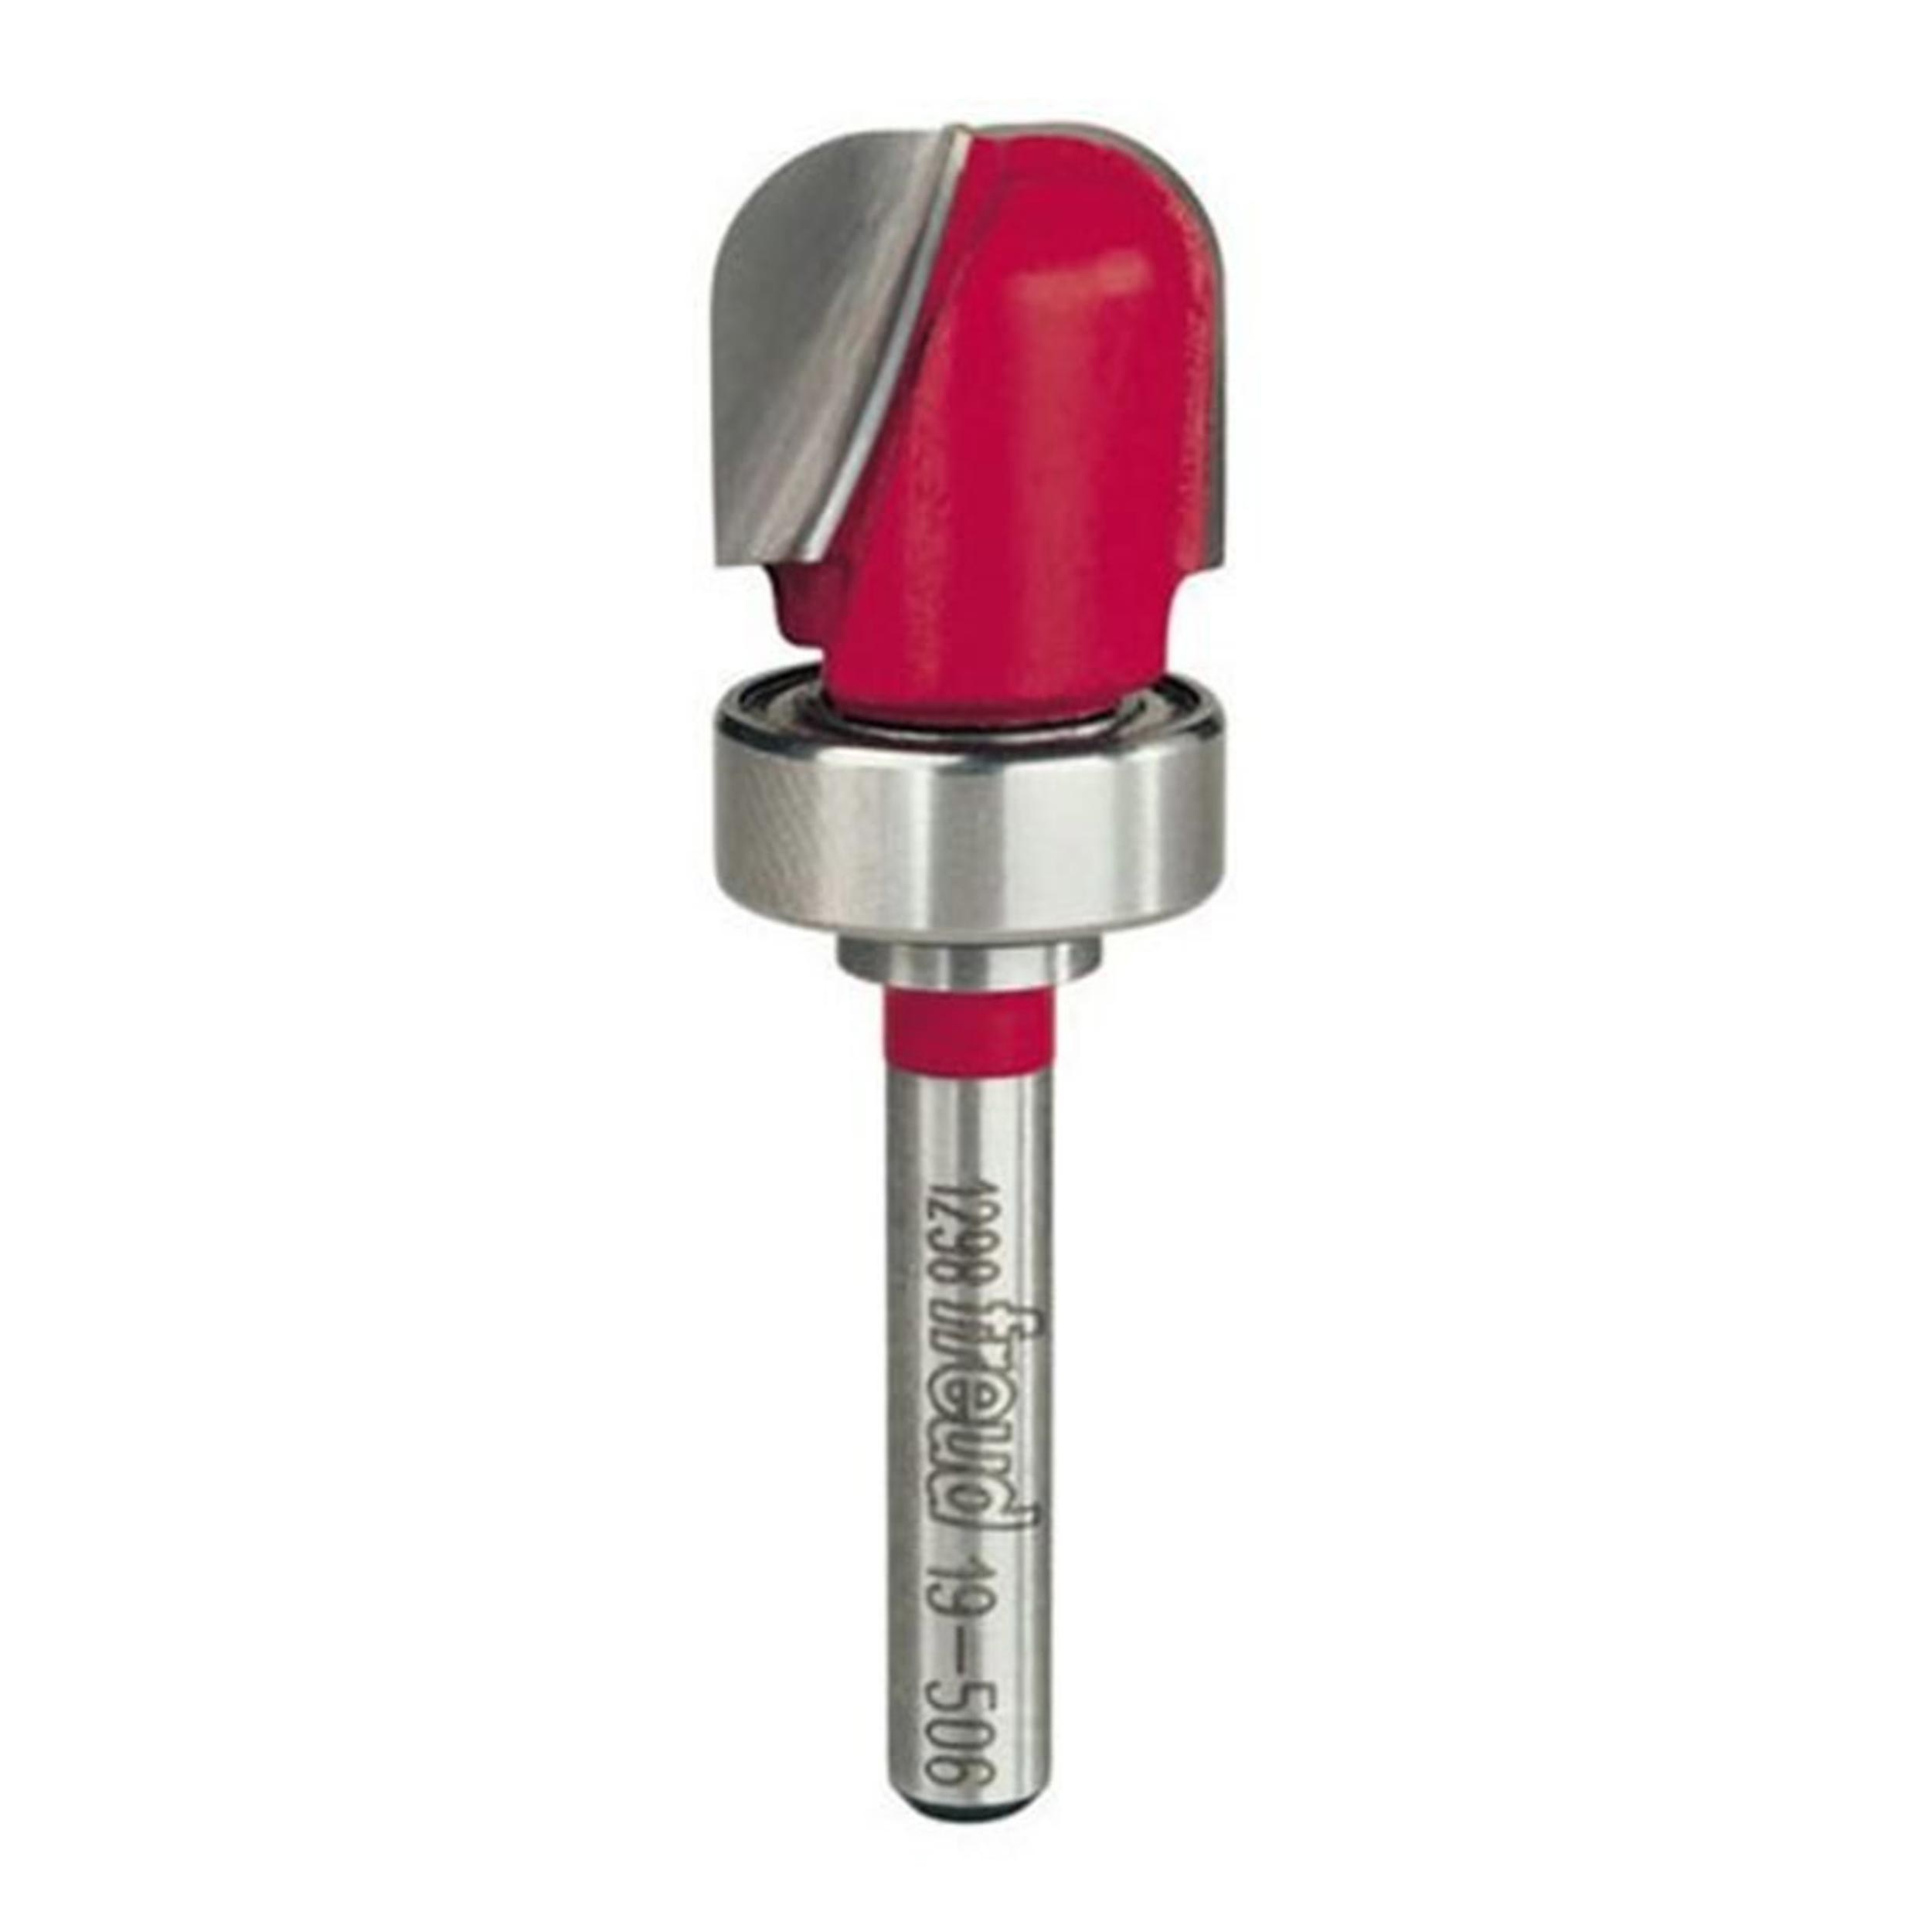 19-506 Dish Carving Router Bit With Top Bearing 1/4" Sh 3/4" D 5/8" Cl 1/4" R